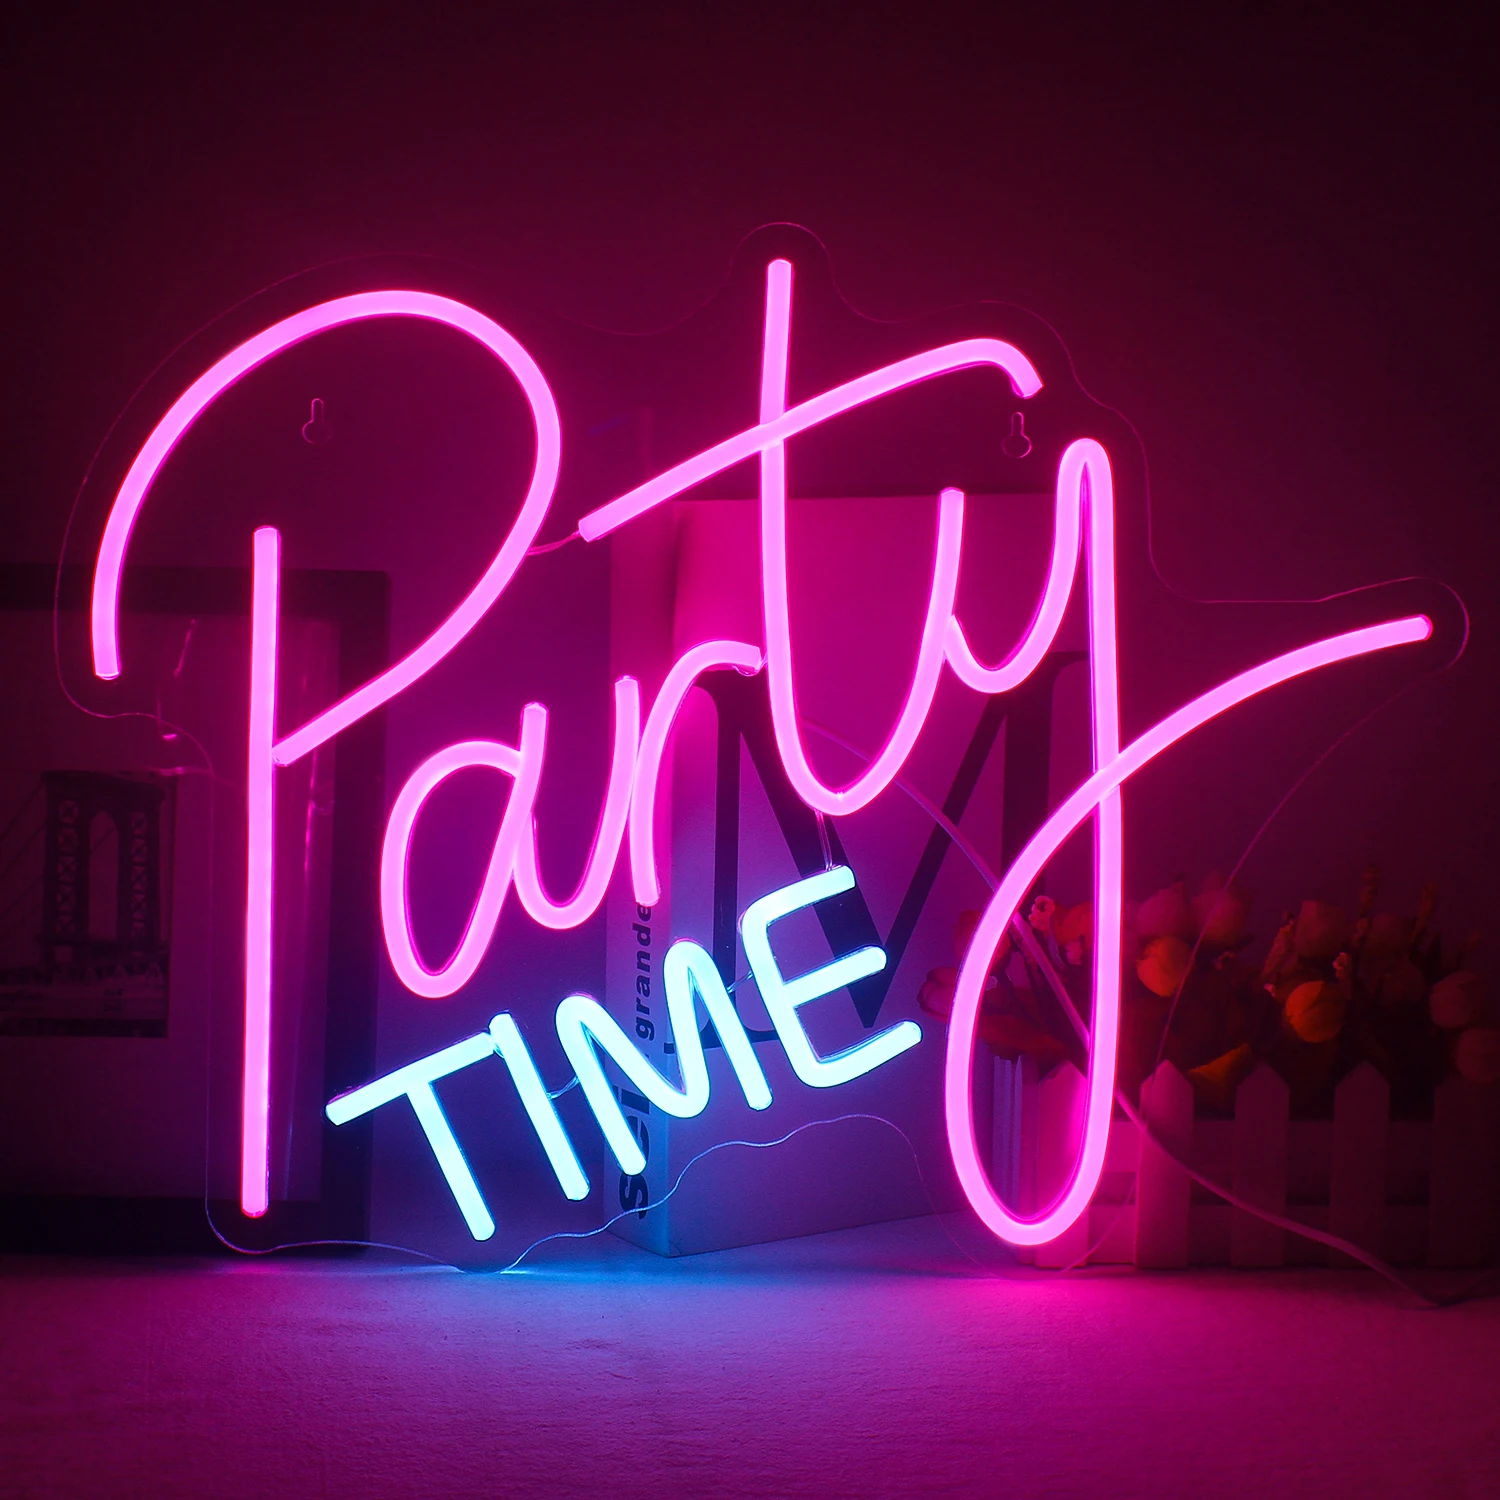 Party Time Lighting Neon Sign LED For Birthdays Weddings Club of Various Festivals Indoor and Outdoor holiday Wall Decoration